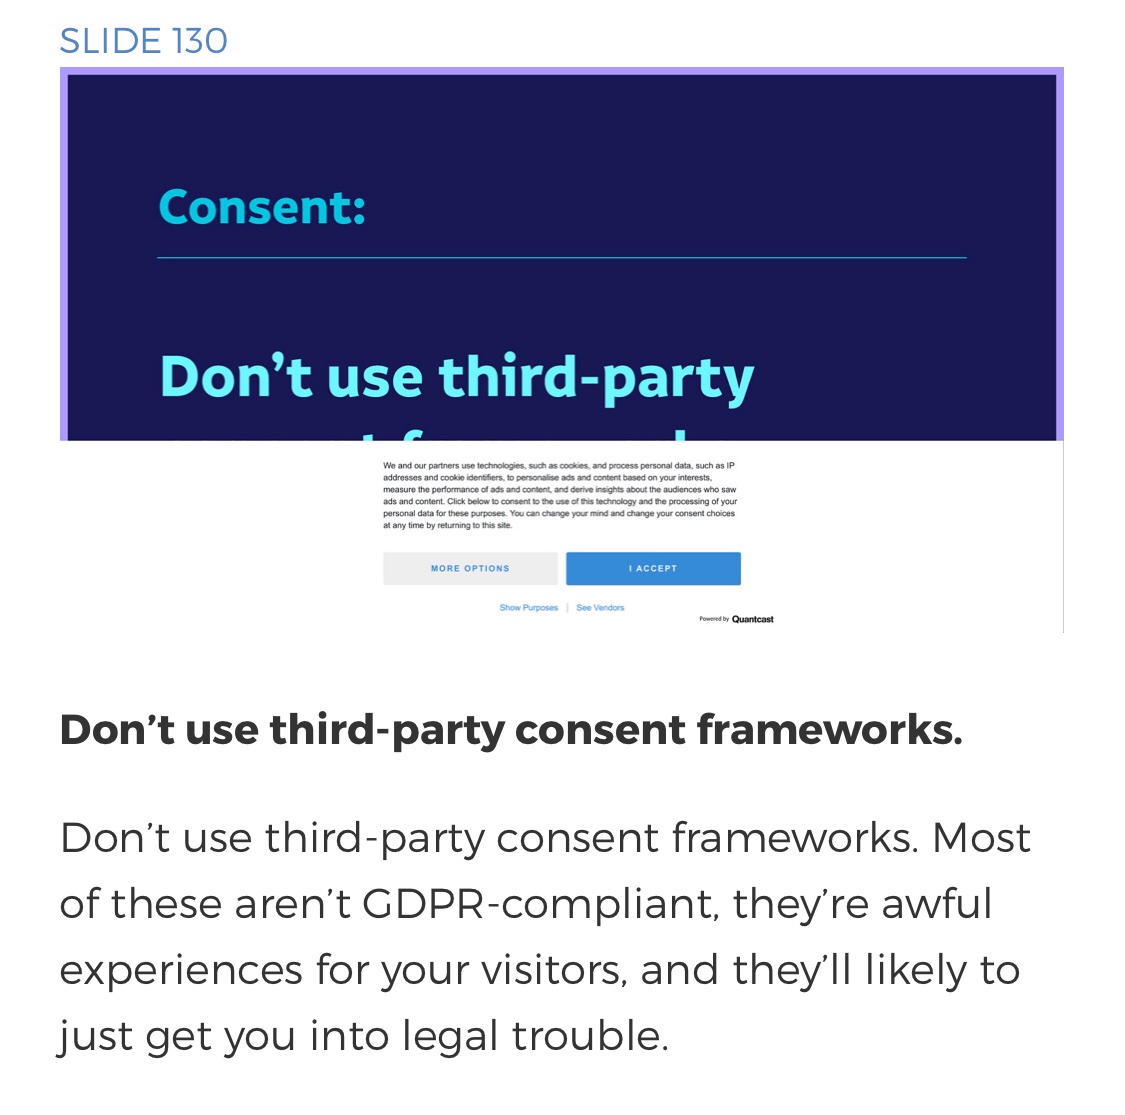 Slide 130 from a talk saying “Consent: Don’t use third-party consent frameworks. Most of these aren’t GDPR-compliant, they’re awful experiences for your visitors, and they’ll likely to just get you into legal trouble.”